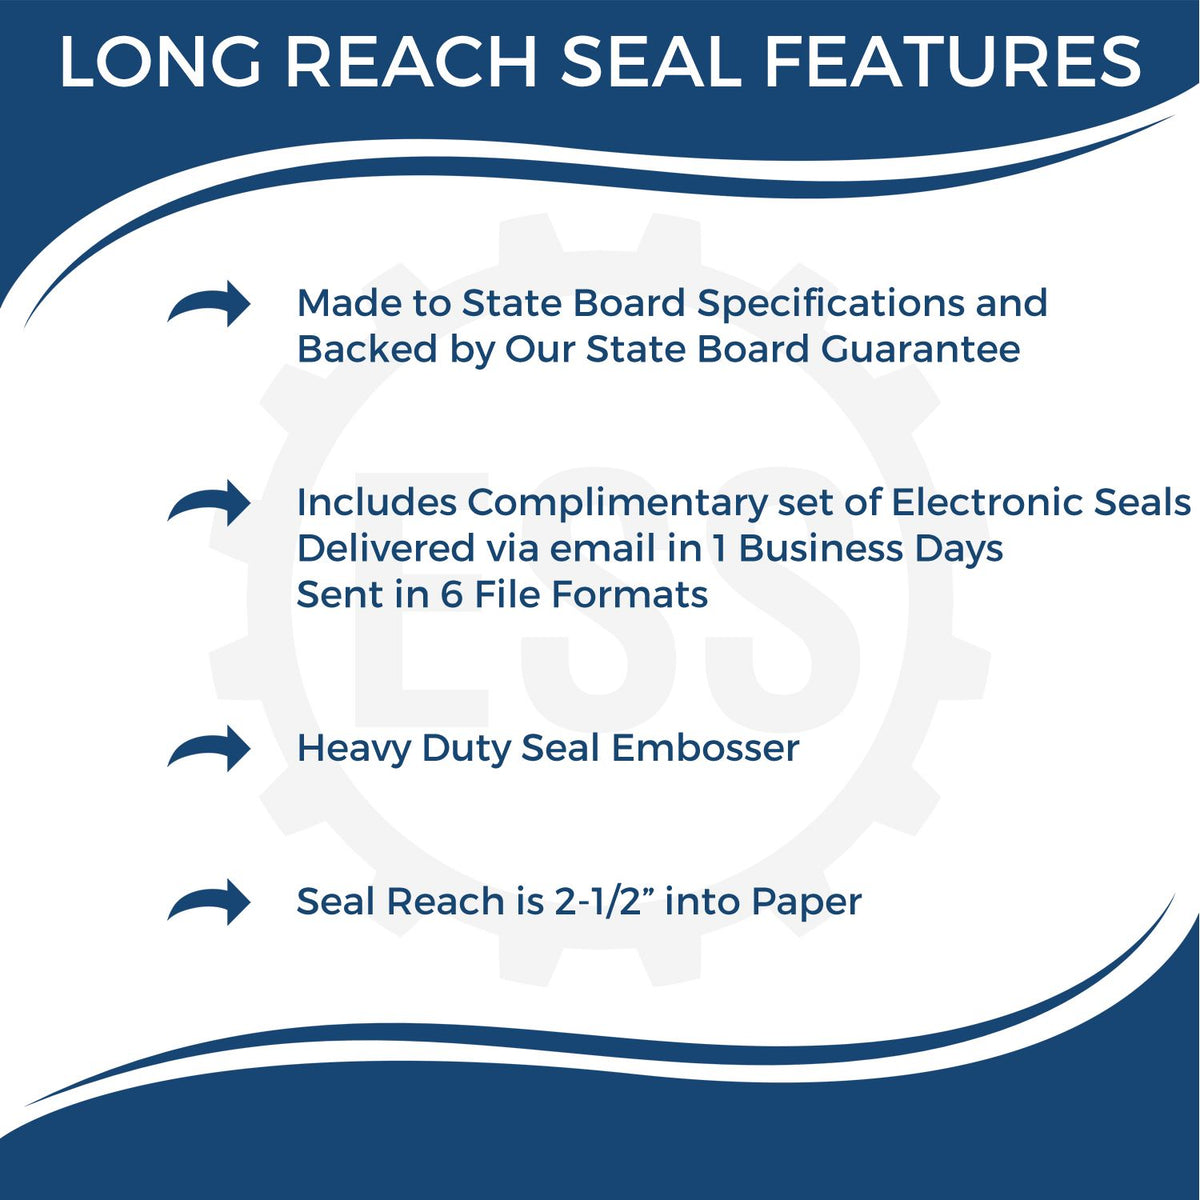 A picture of an infographic highlighting the selling points for the Long Reach New York Geology Seal